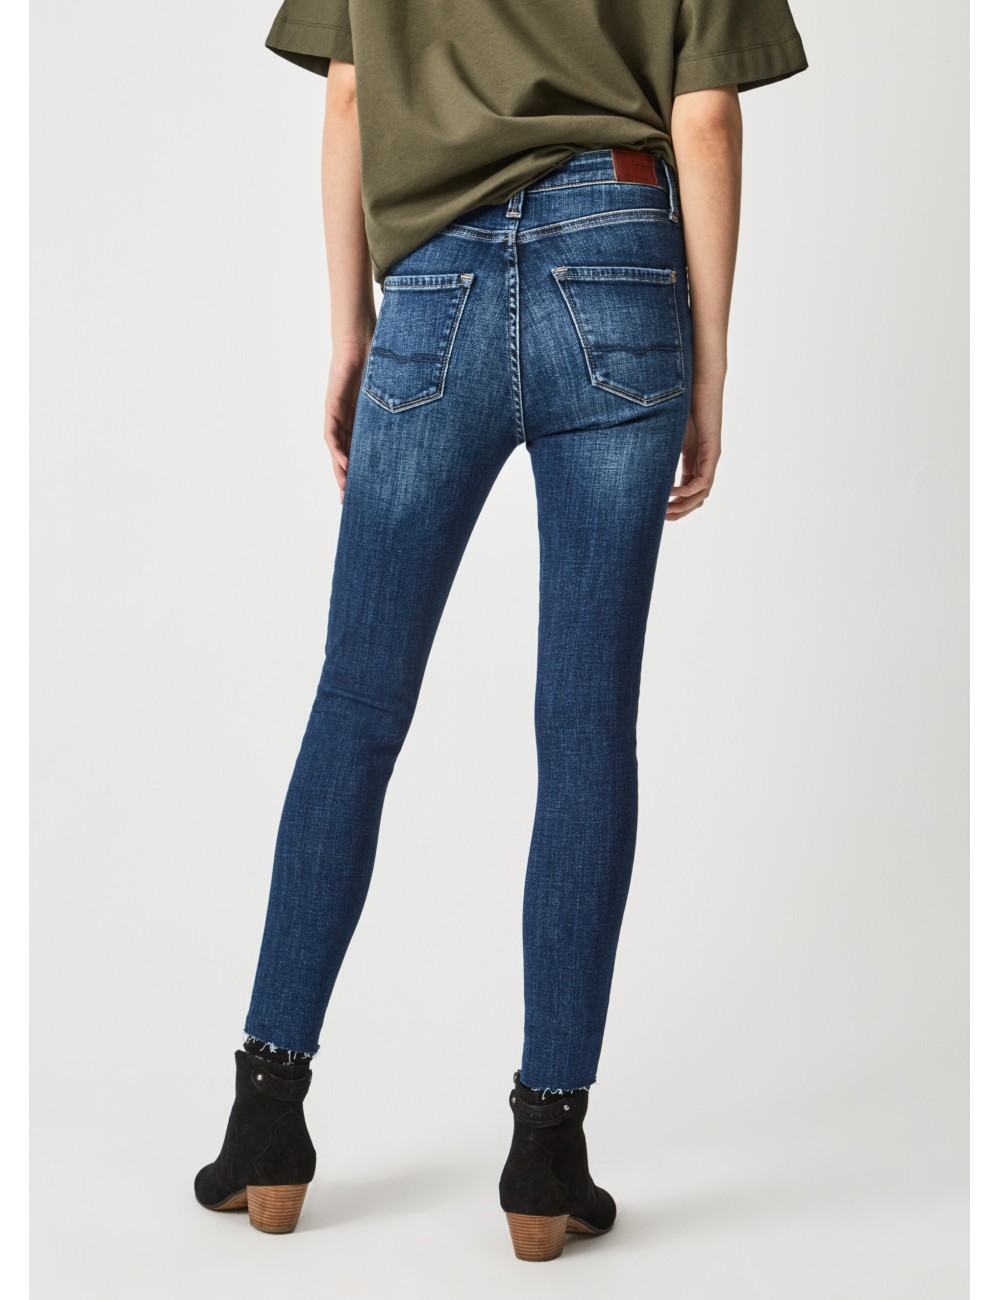 WOMEN'S JEANS PEPE JEANS DION